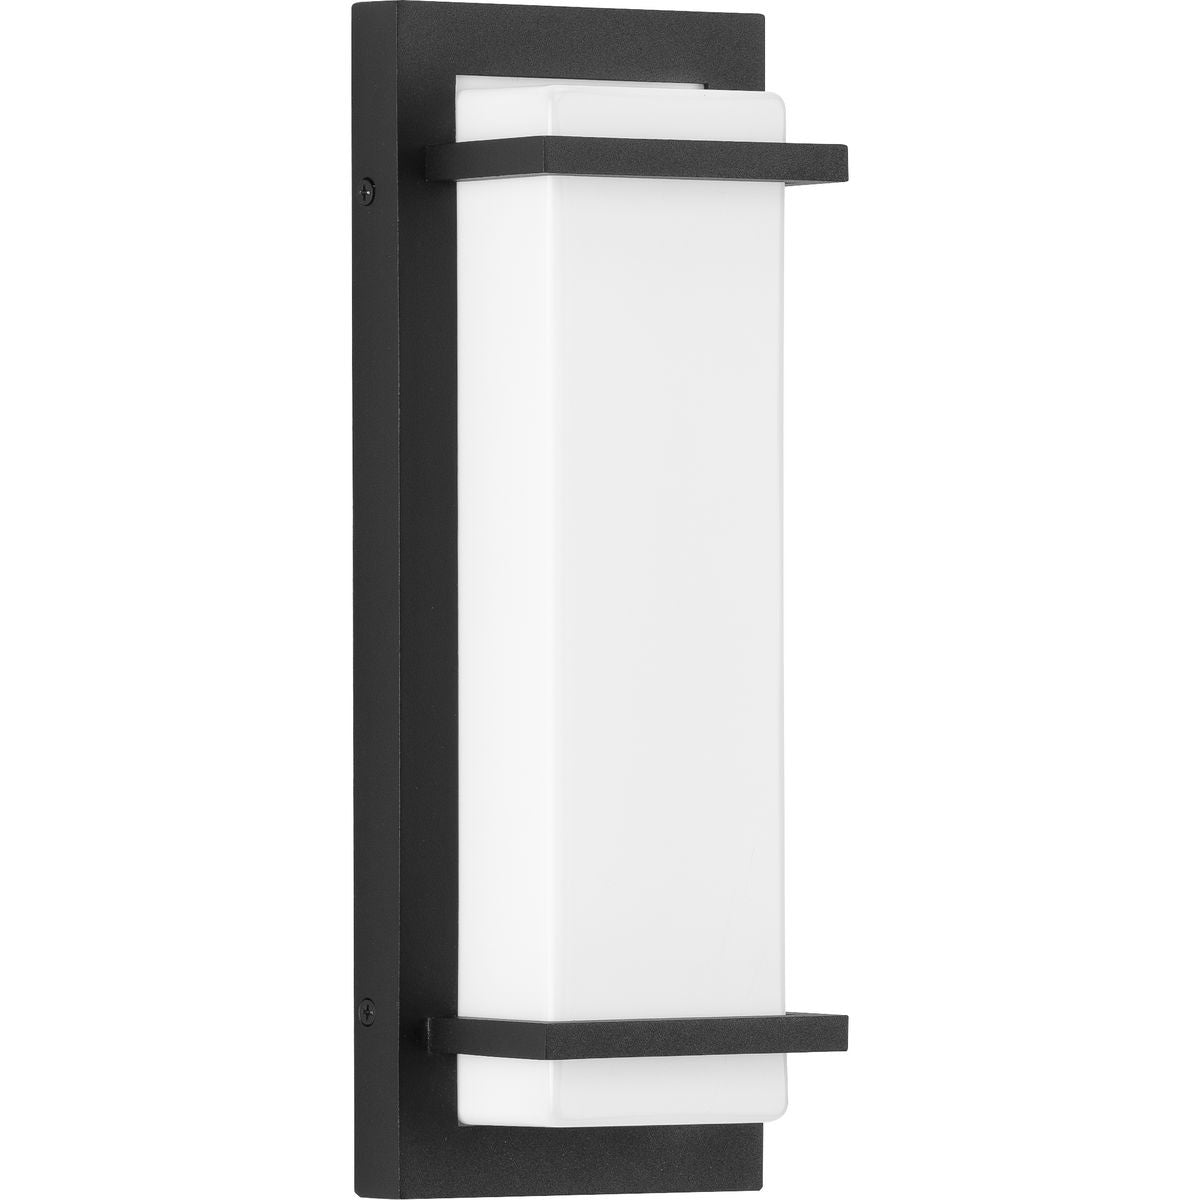 Z-1080 LED Outdoor Wall Light